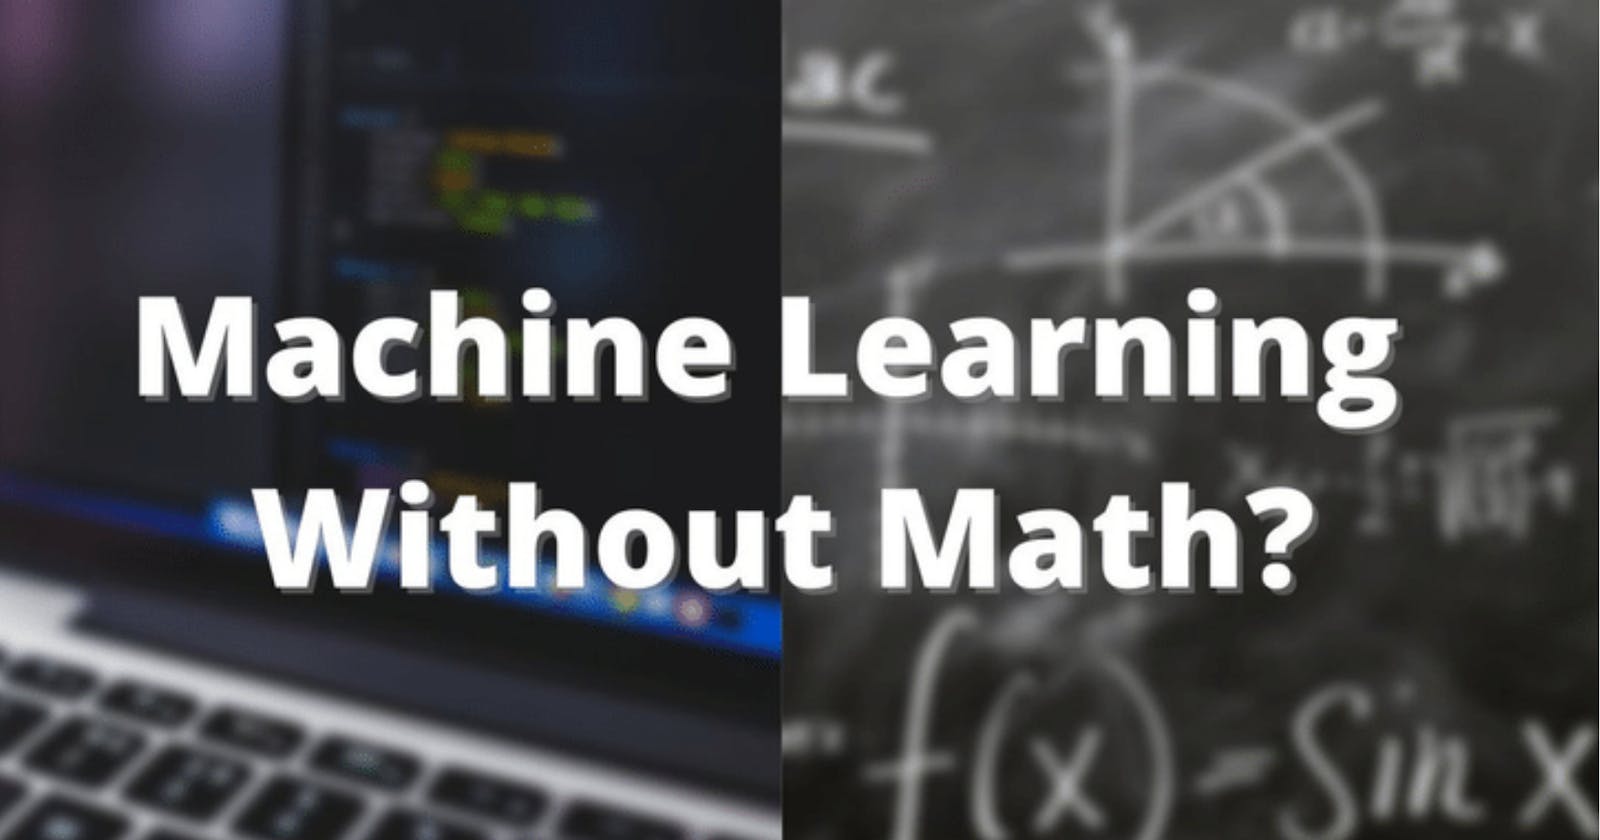 You don't need to know complex math to get started with machine learning!